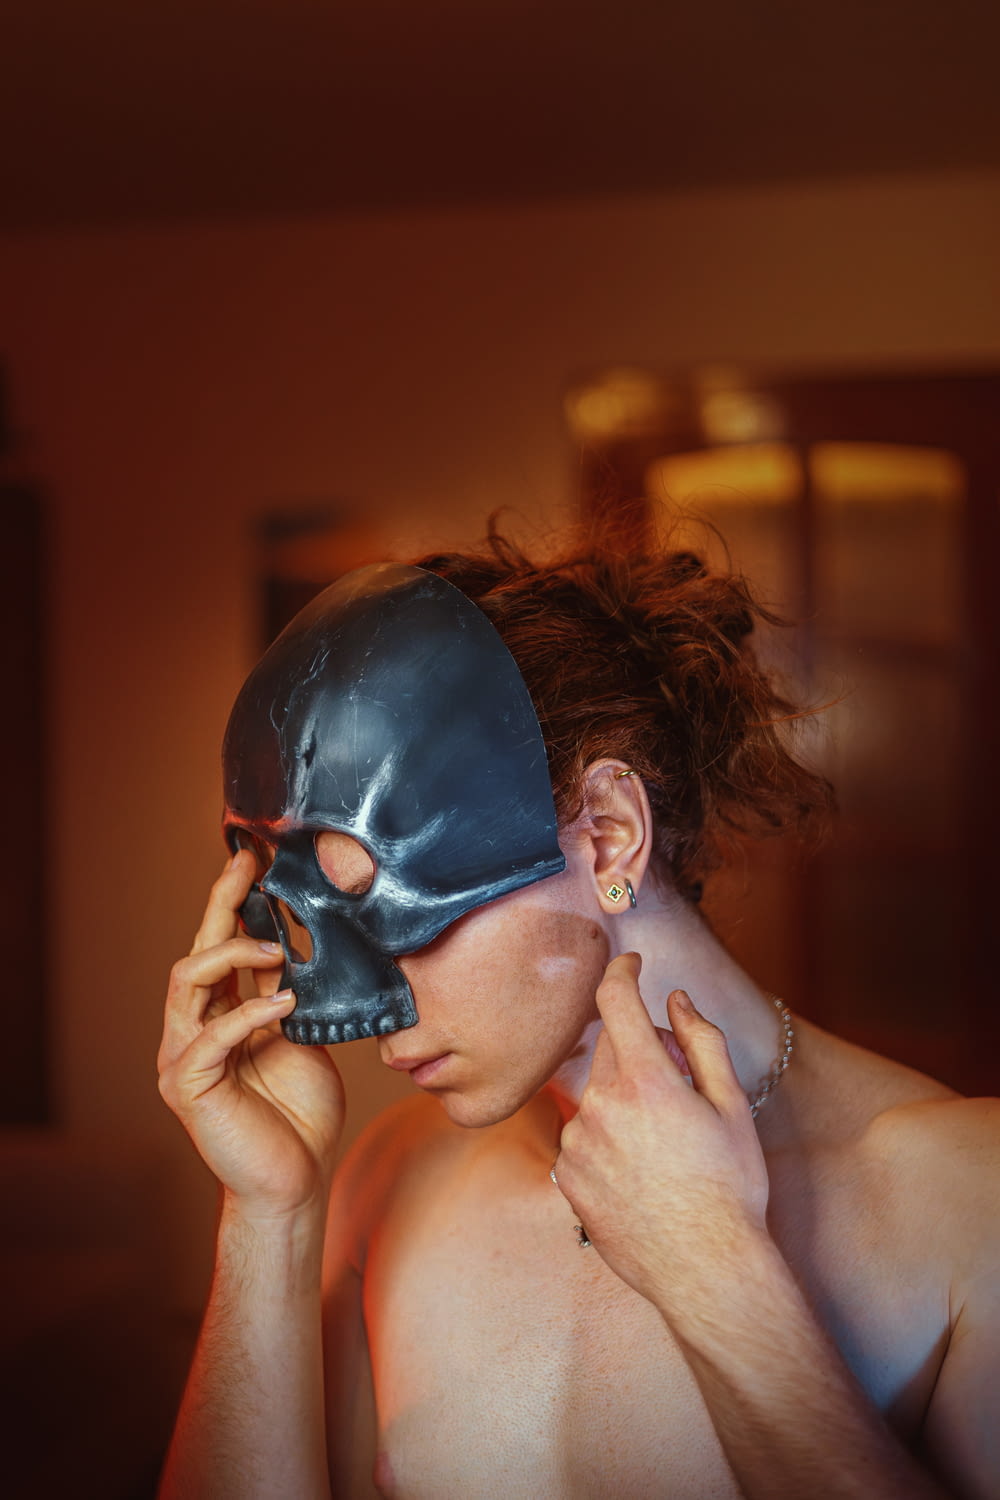 a woman with a skull mask covering her face